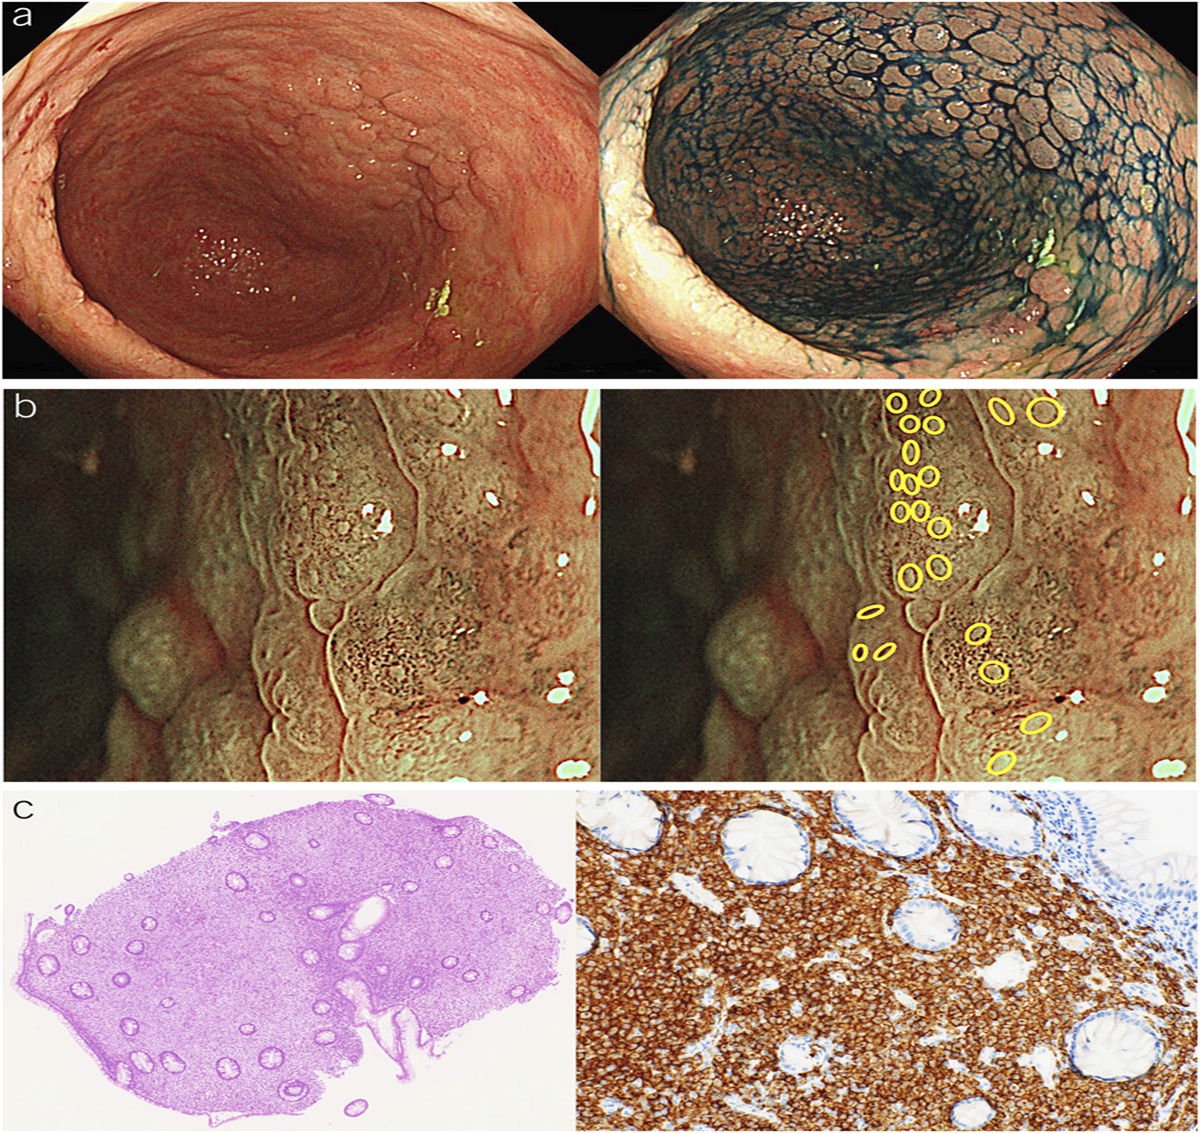 Systemic Mastocytosis Observed by Image-Enhanced Endoscopy